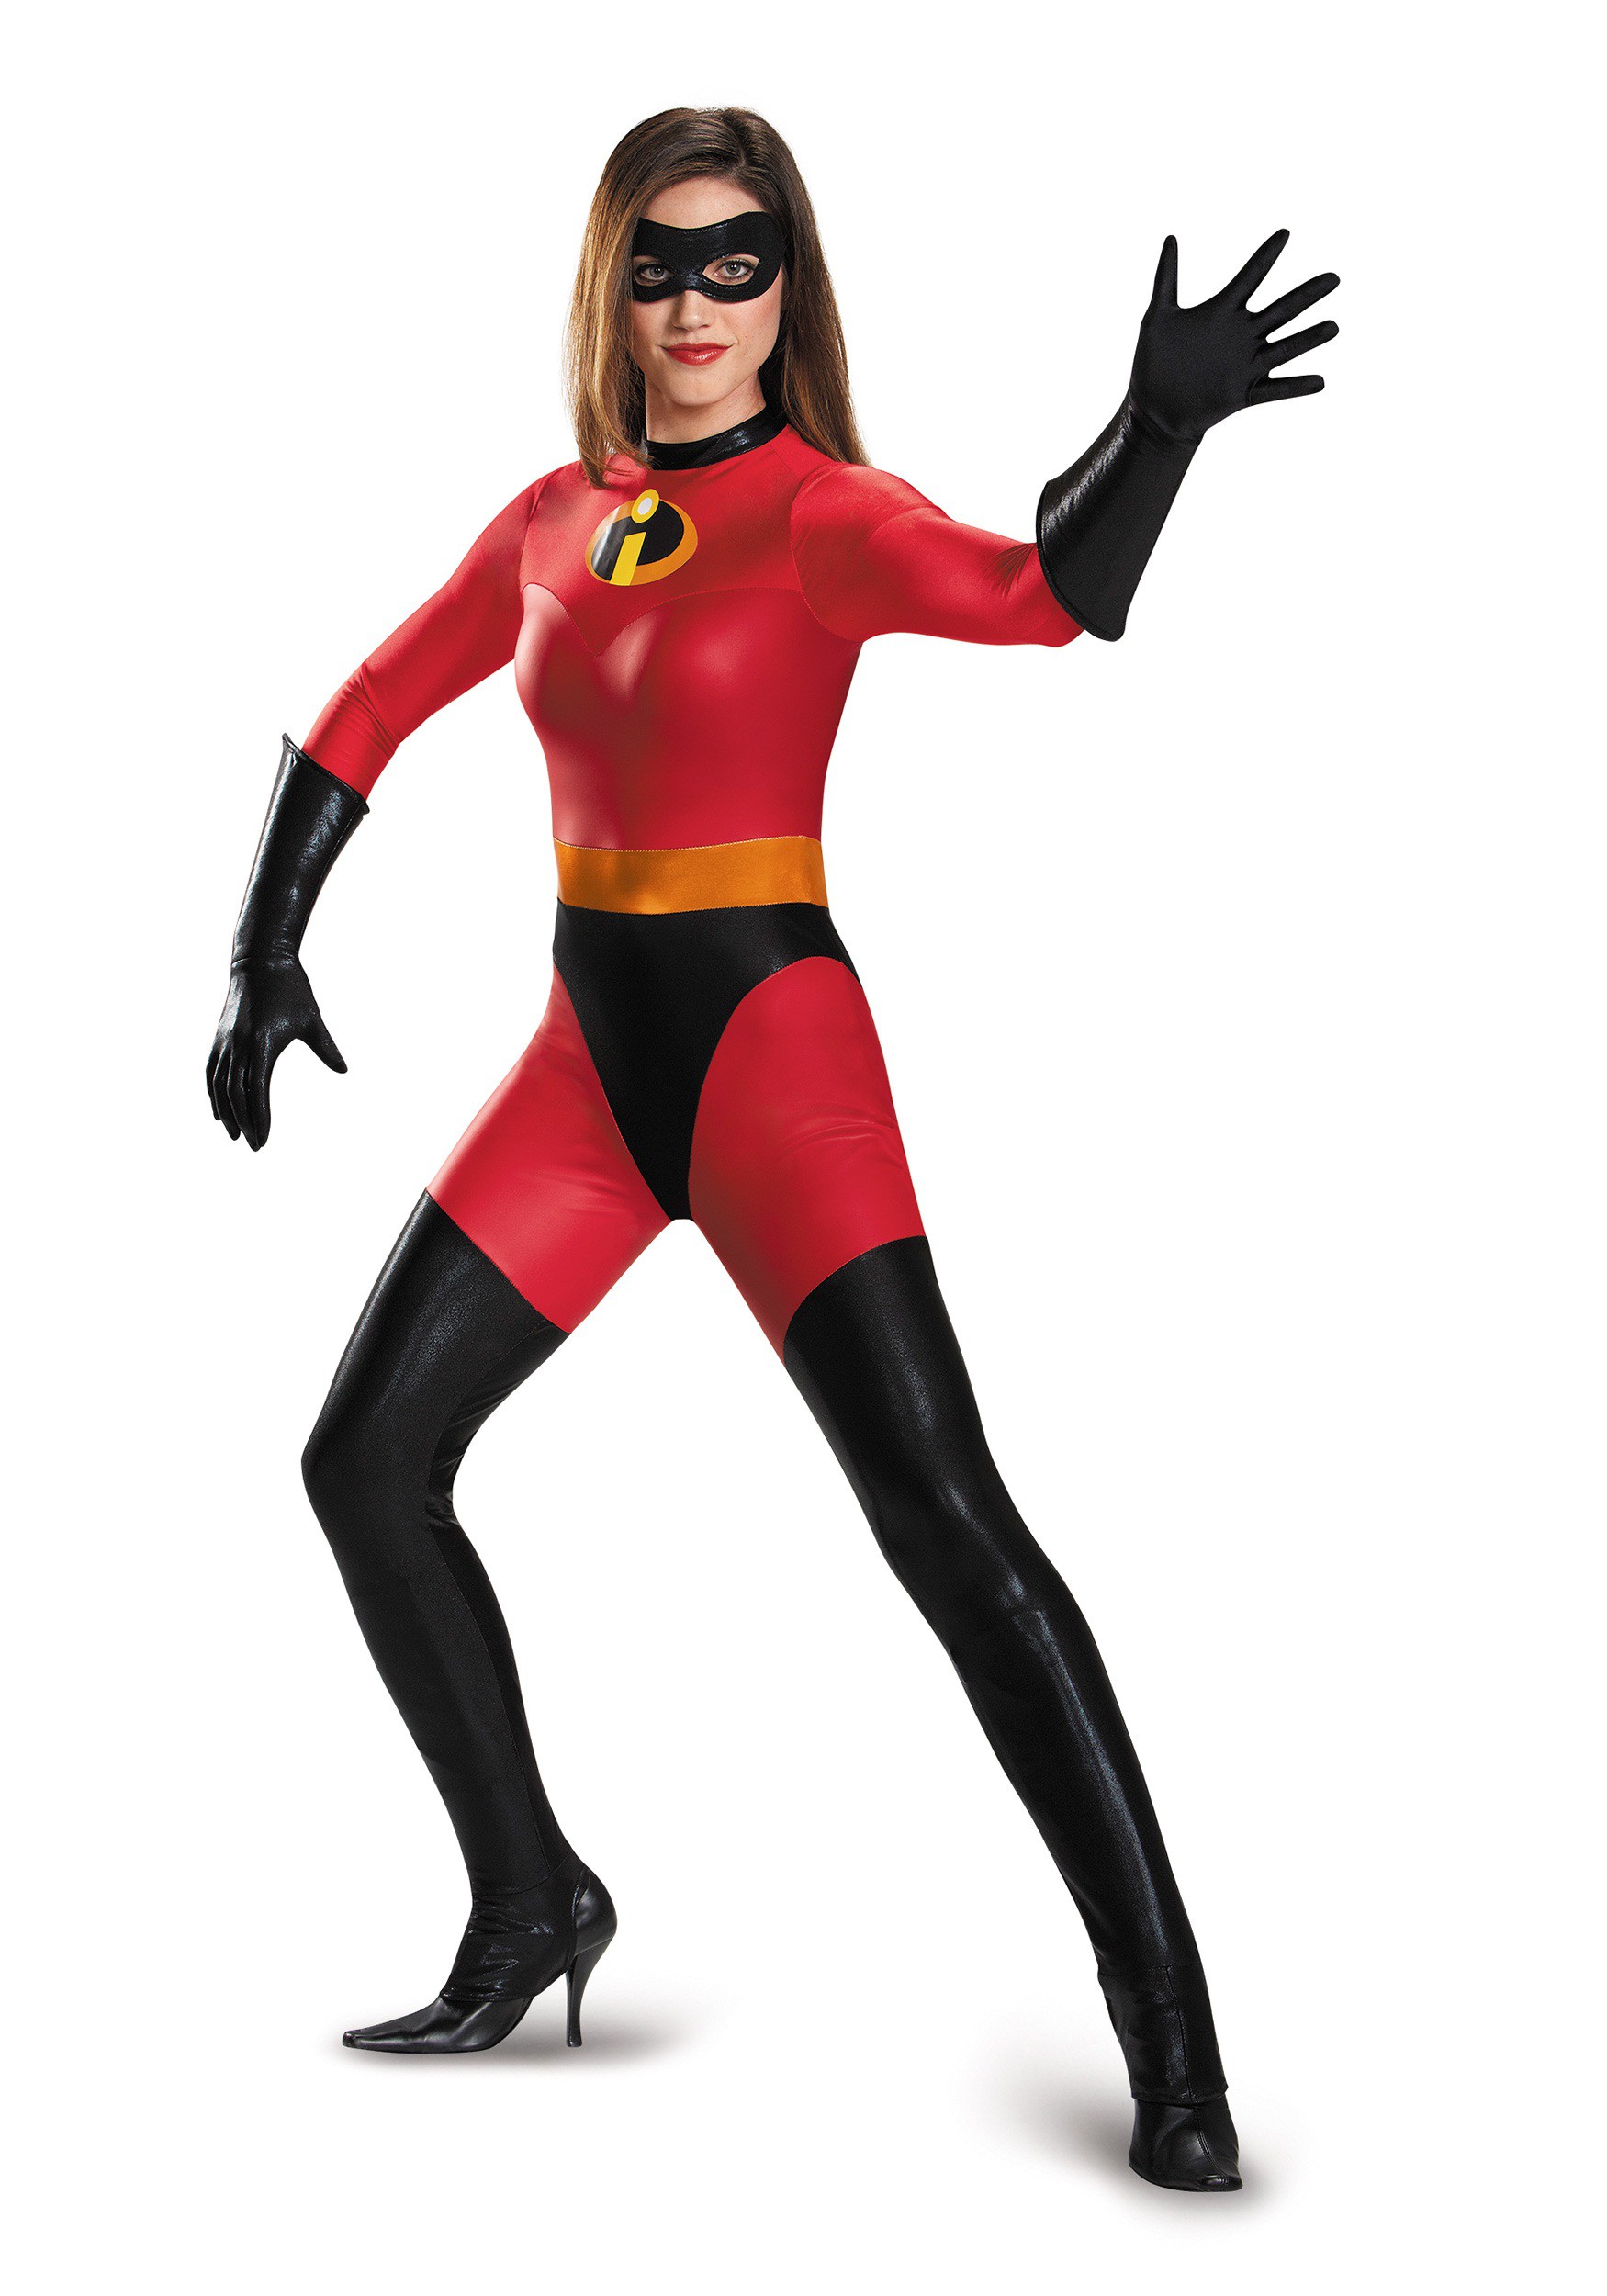 Incredibles body suit